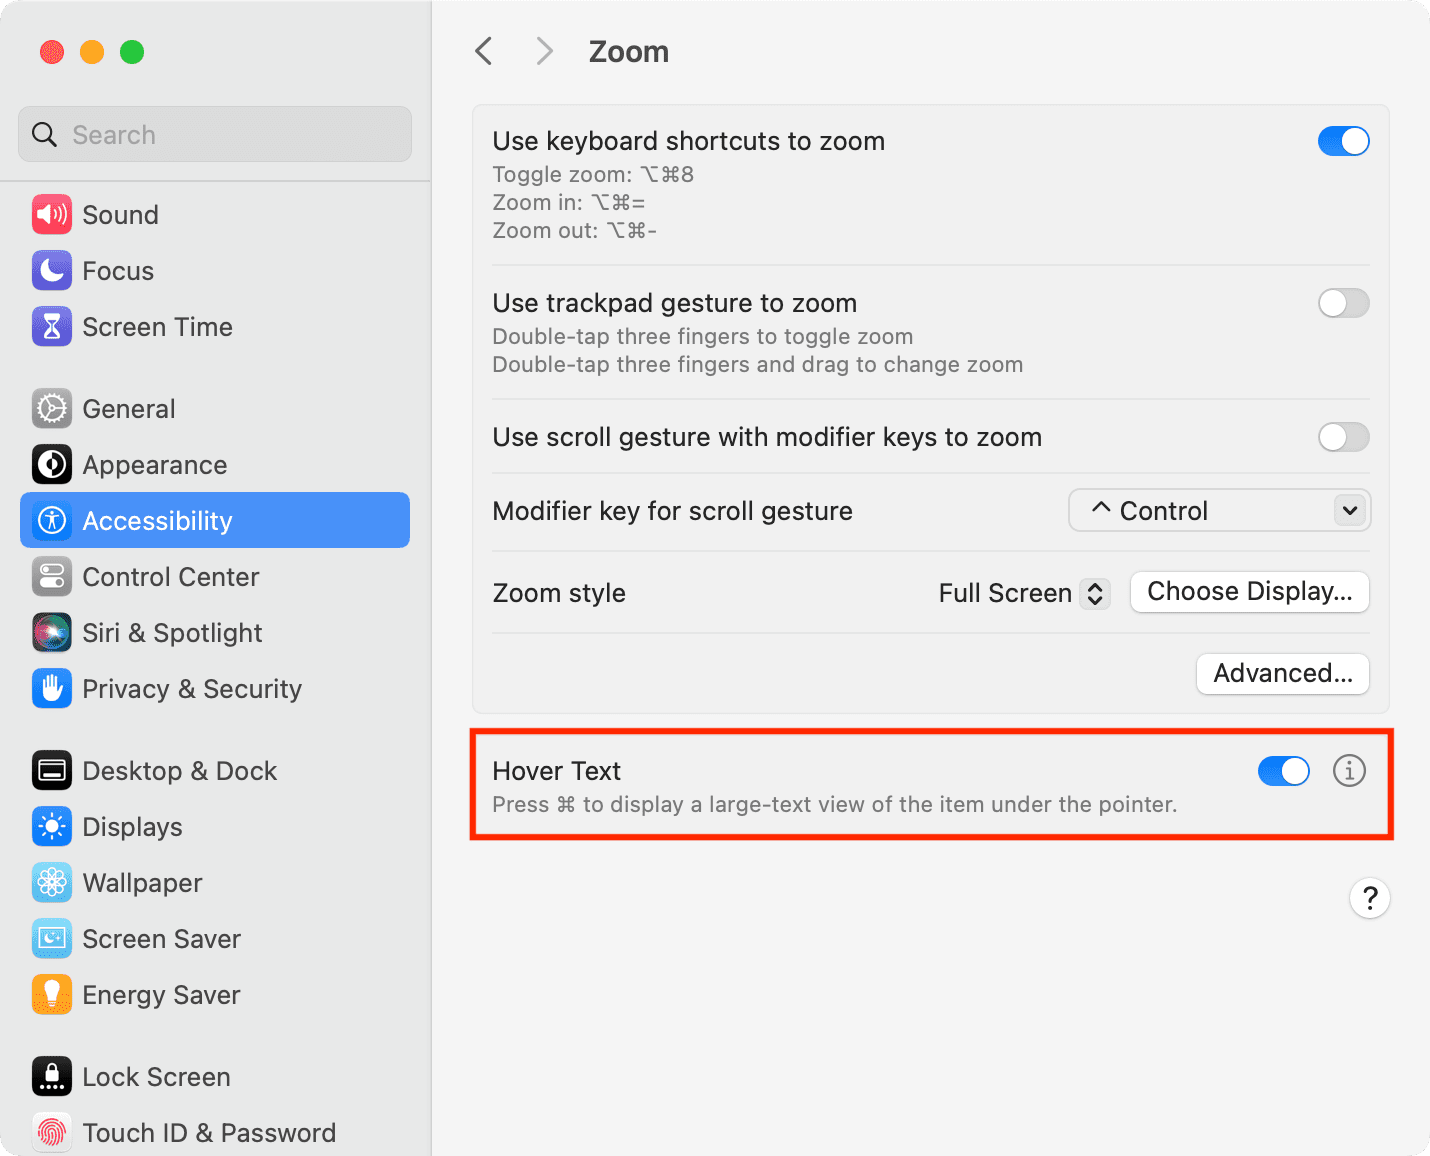 Hover Text in Zoom Accessibility settings on Mac